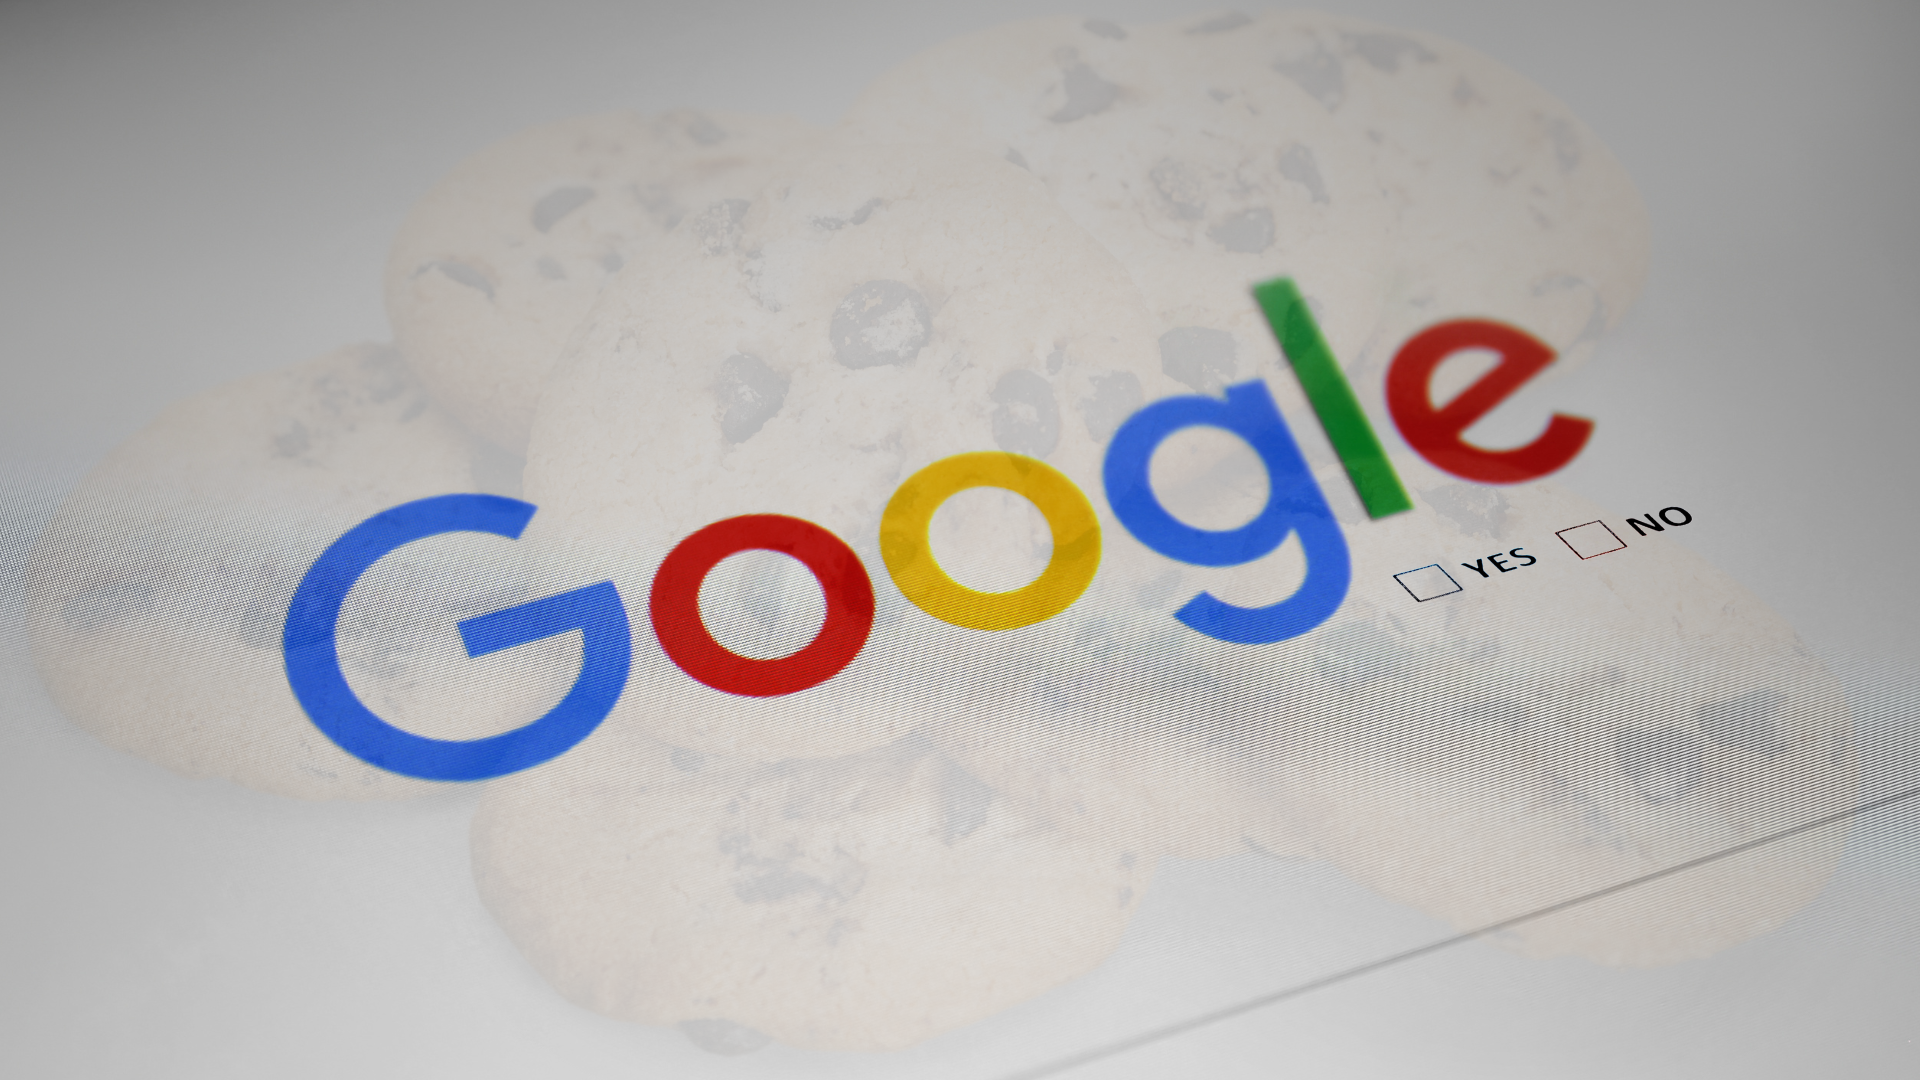 Google Consent Mode V2, which focuses on data processing consent, cookies and more, as shown by this Google logo atop a consent form and cookies